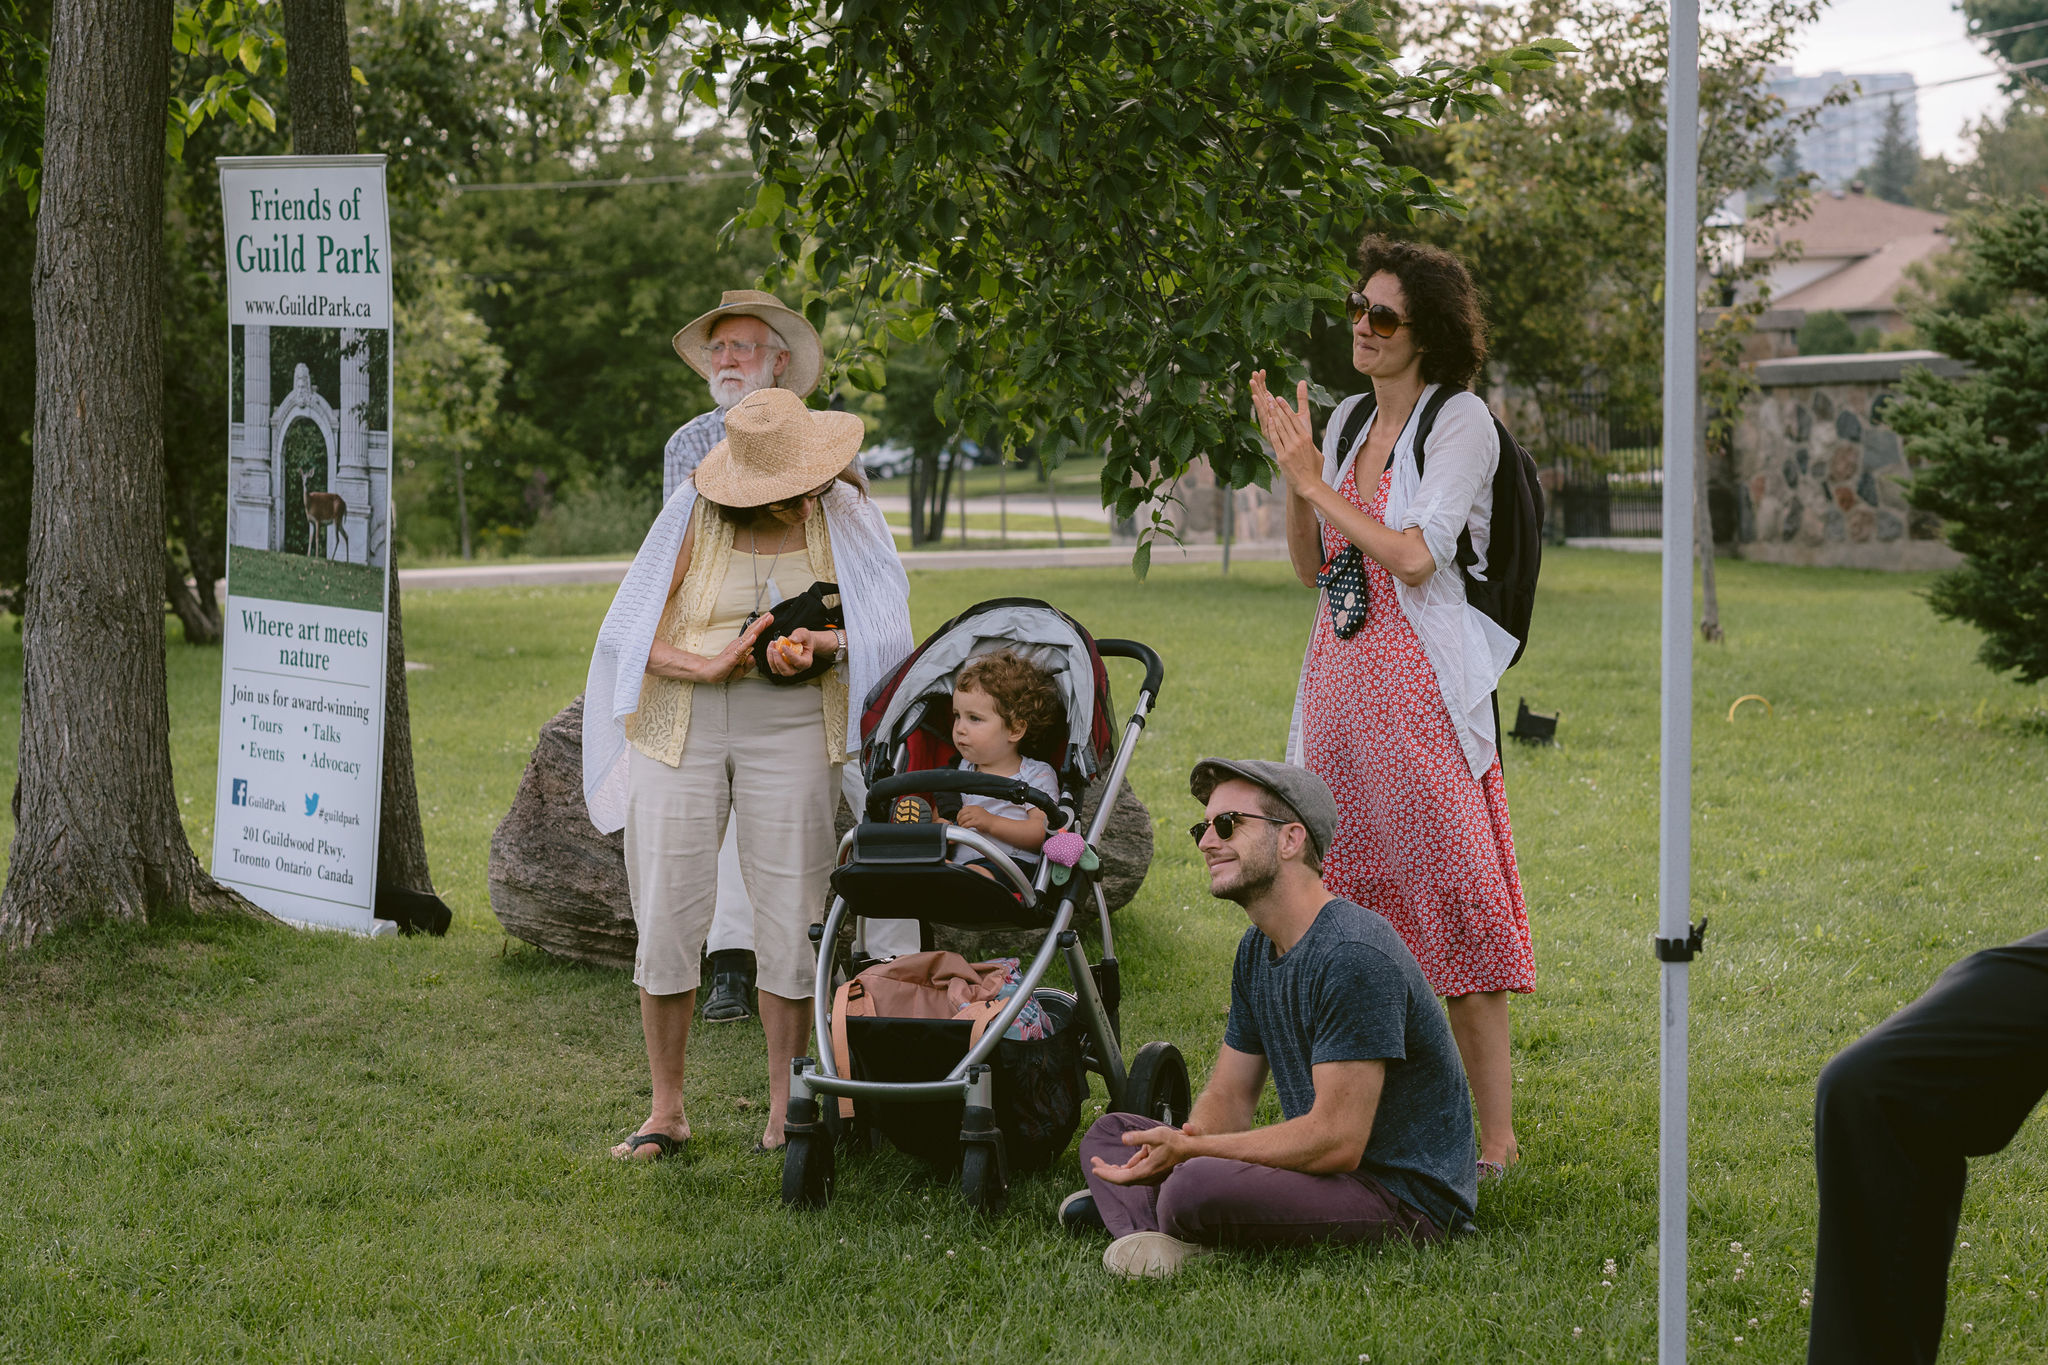 A family watches a Tapestry Opera Box Concert, with a Friends of Guild Park sign in the background.